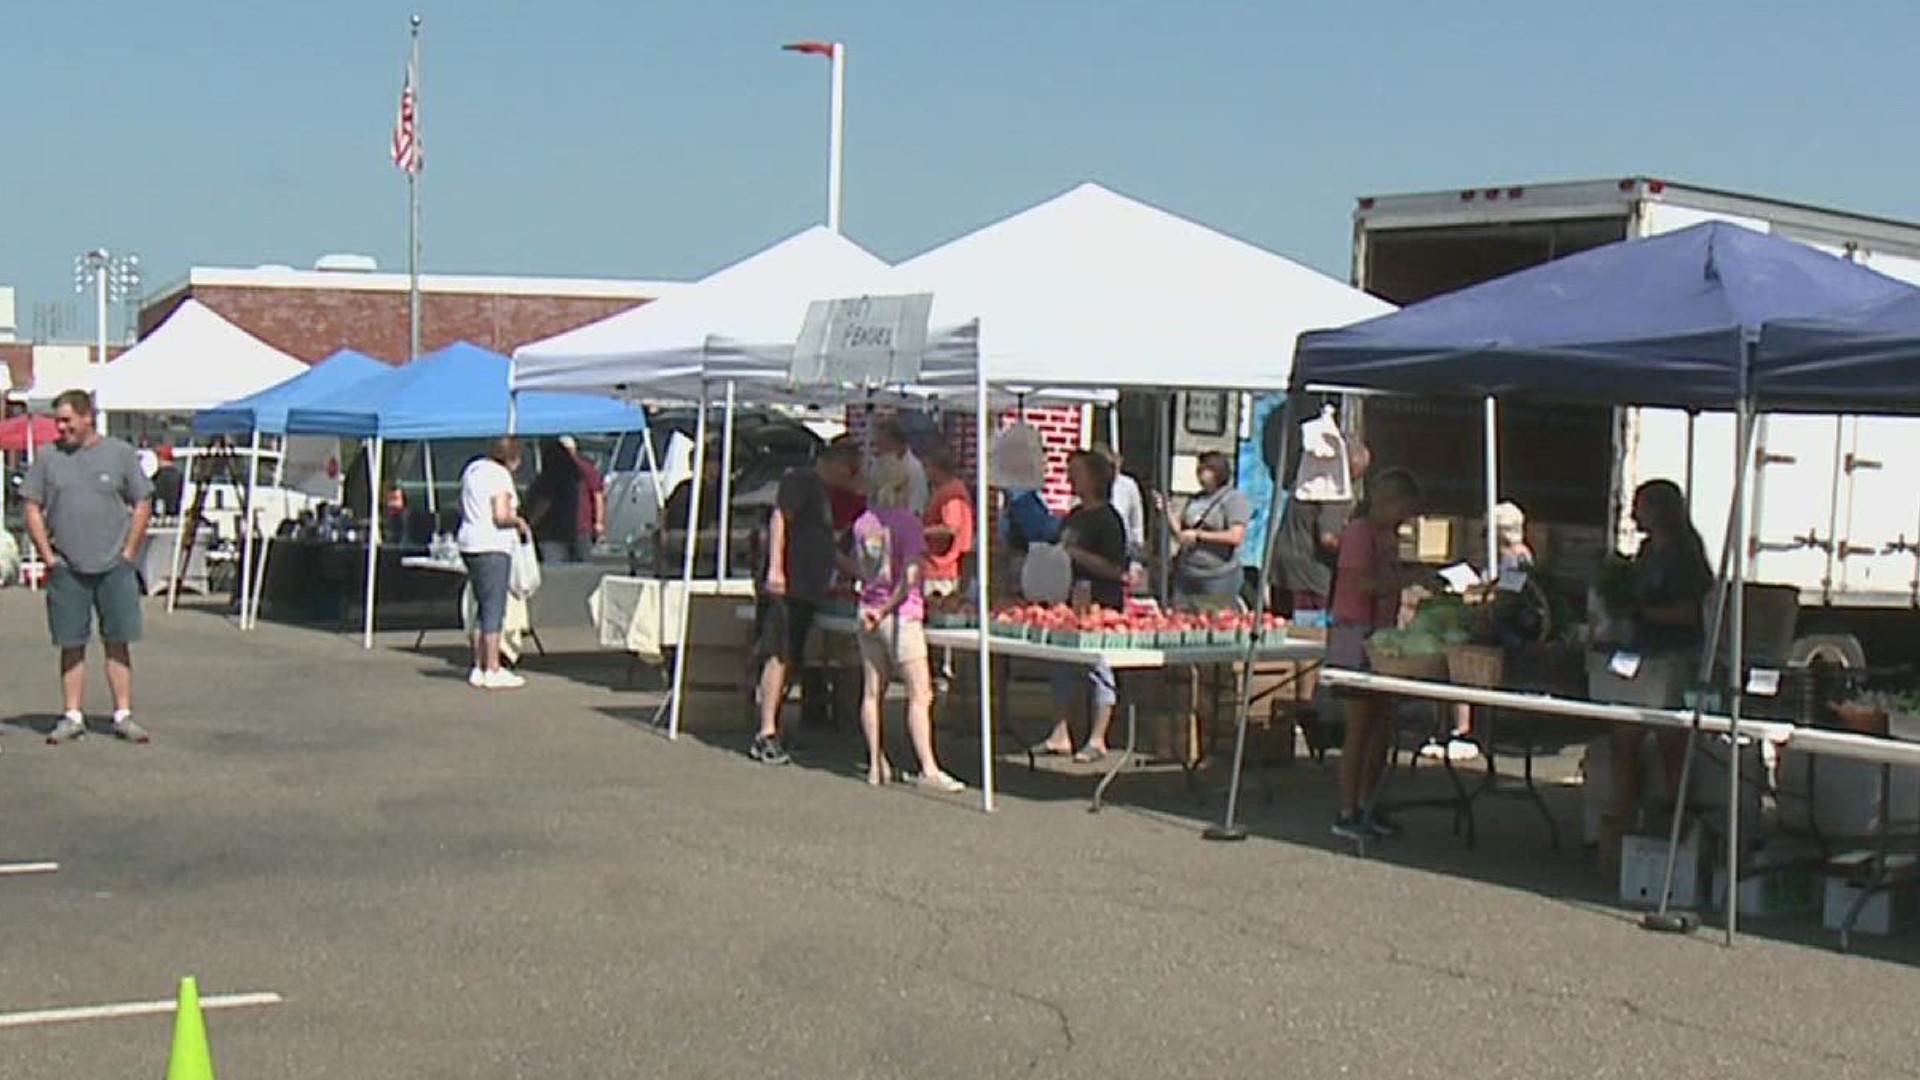 Vendors say this market helps supplement their income.